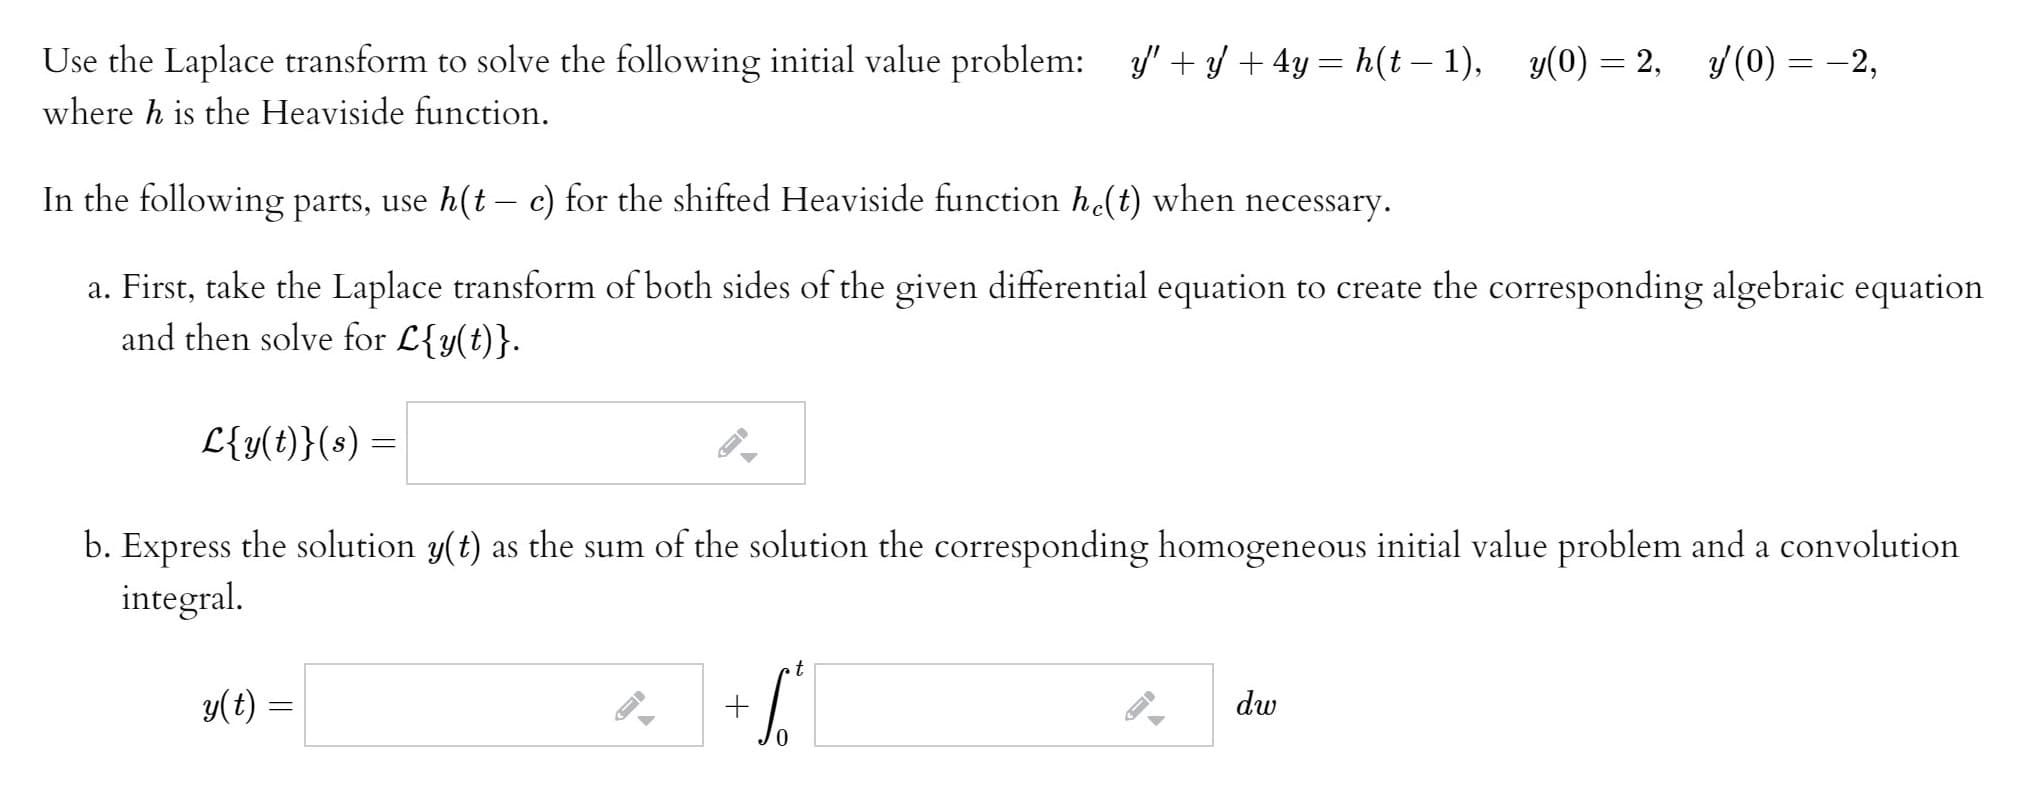 Use the Laplace transform to solve the following initial value problem: " +/ + 4y = h(t – 1),
where h is the Heaviside function.
In the following parts, use h(t – c) for the shifted Heaviside function h(t) when necessary.
a. First, take the Laplace transform of both sides of the given differential equation to create the corresponding algebraic equation
and then solve for L{y(t)}.
L{y(t)}(s) =
b. Express the solution y(t) as the sum of the solution the corresponding homogeneous initial value problem and a convolution
integral.
y(t) =
dw
